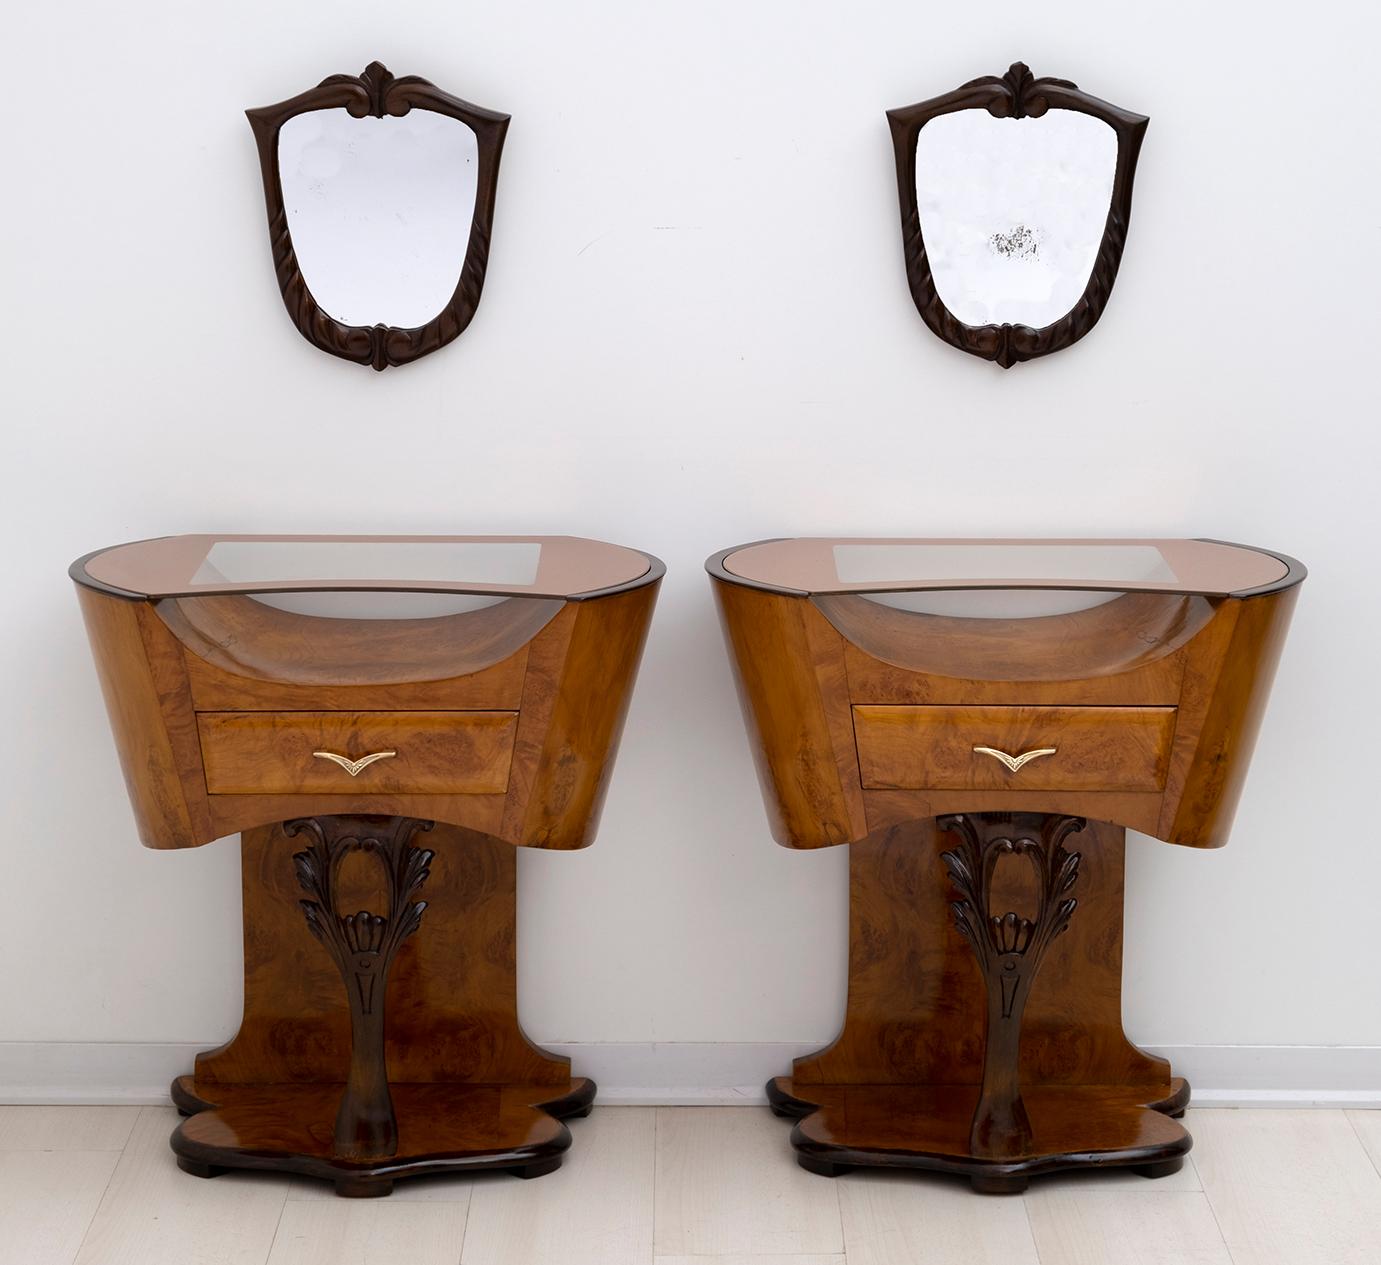 Pair of original bedside tables produced in Italy in the 1920s, Art Deco period. They are covered in walnut briar, the top is in painted glass, the structure is in poplar and the handles on the drawers are in brass, the mirrors are original and